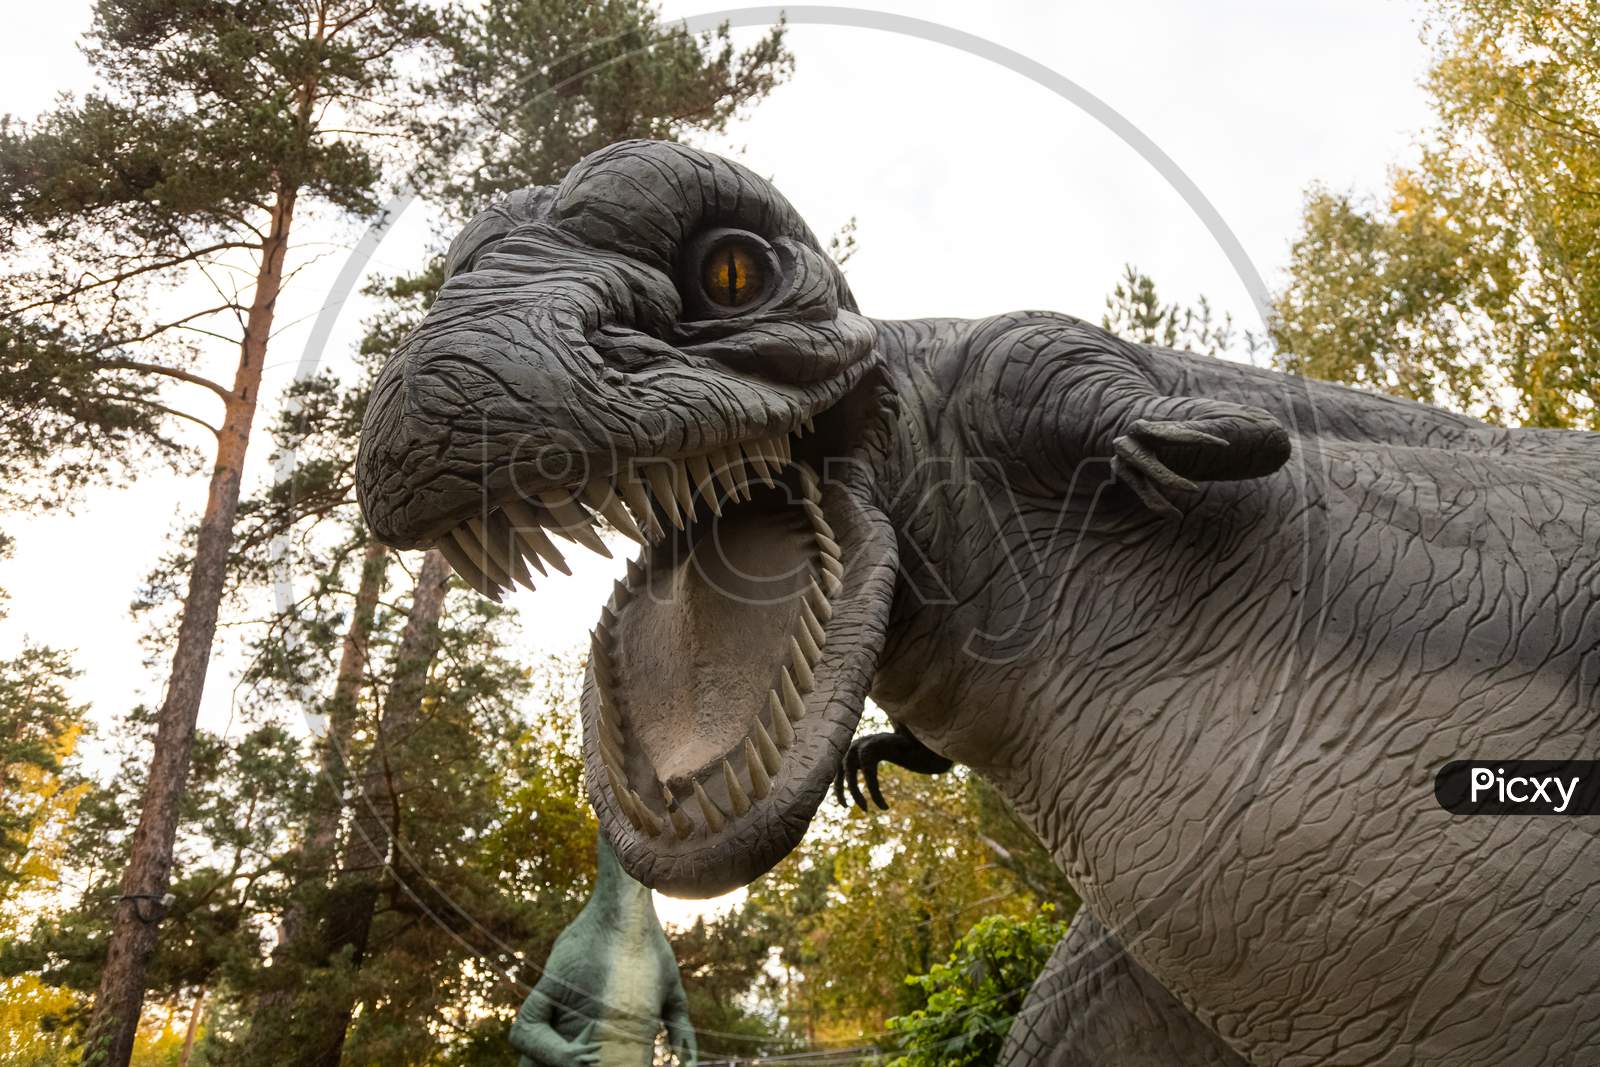 A Portrait Of A Large Gray Adult Tyrannosaurus, Which Predatoryly Dug Its Large Jaw With Fangs And Prepared For An Attack, A Bottom View Against The Sky And Trees. Dinosaur World